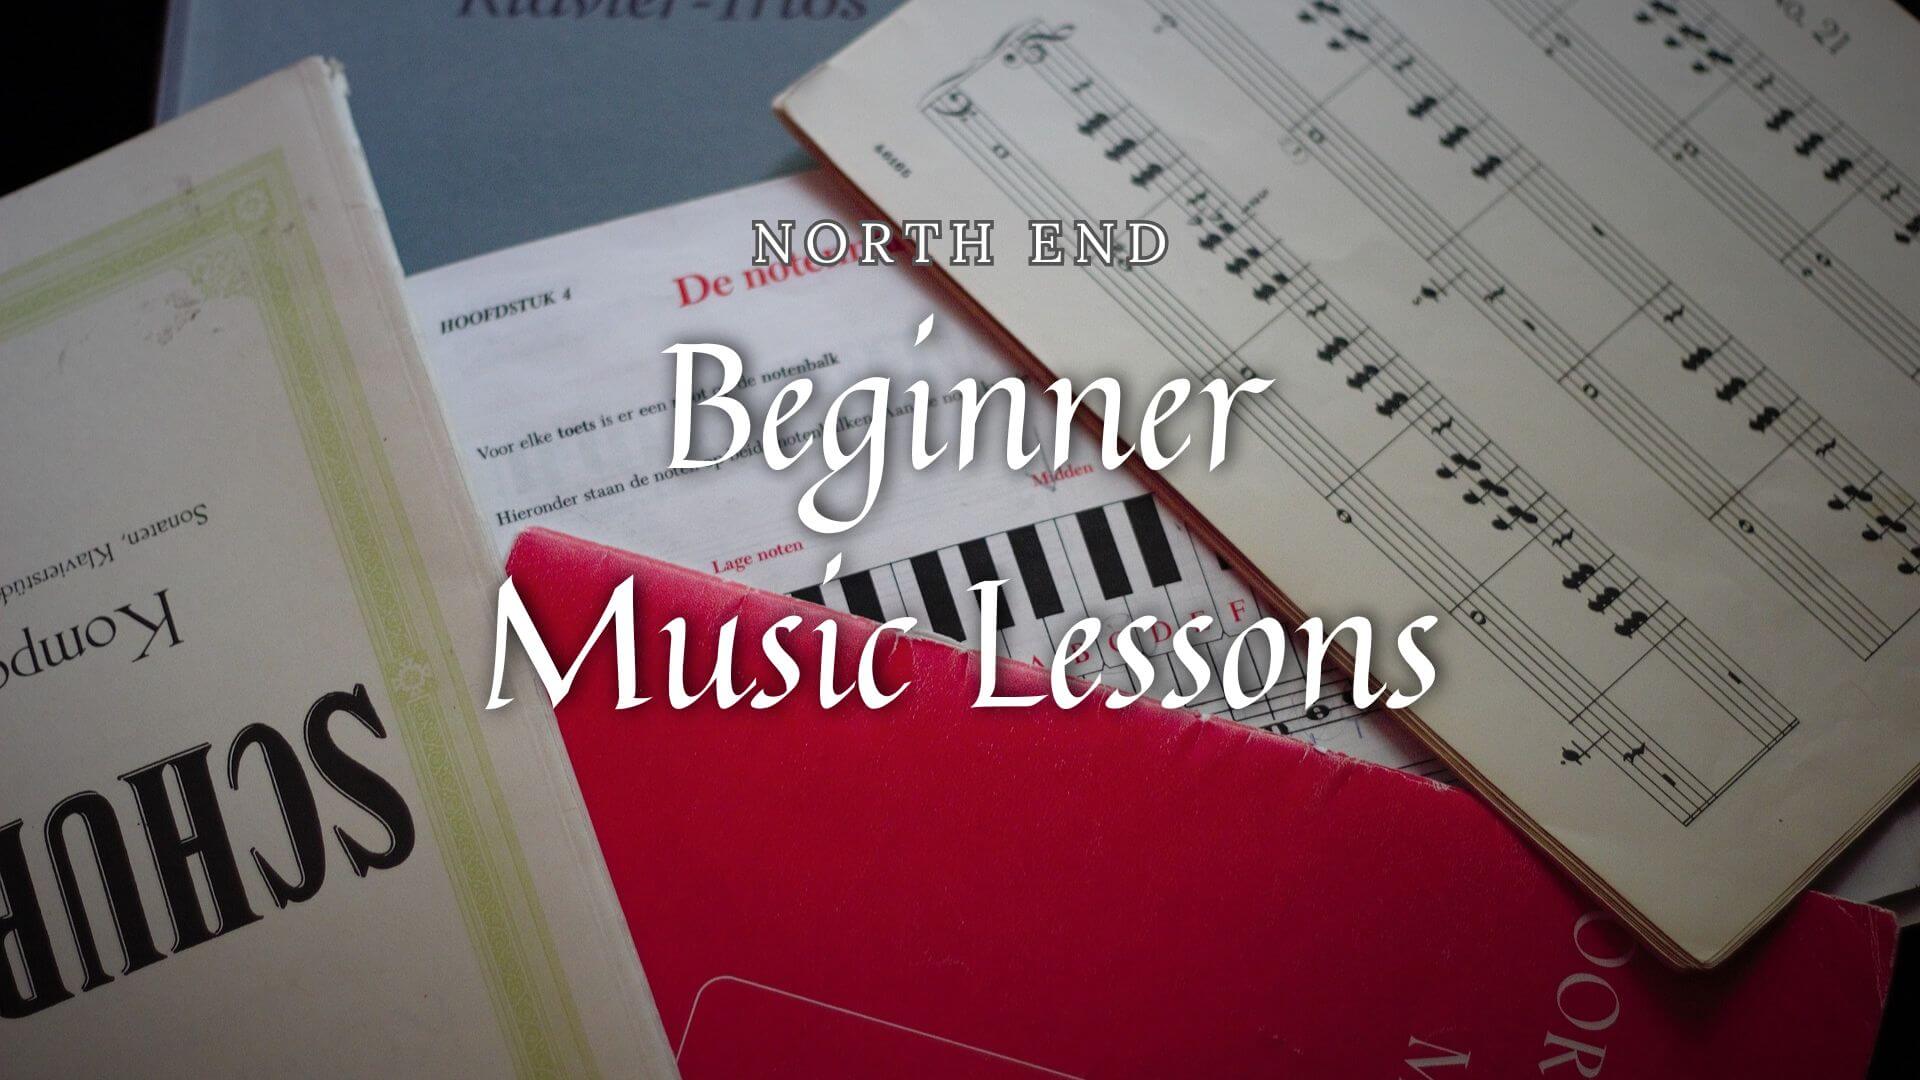 Welcome to North End: Beginner-Friendly Music Classes at Musicians Playground